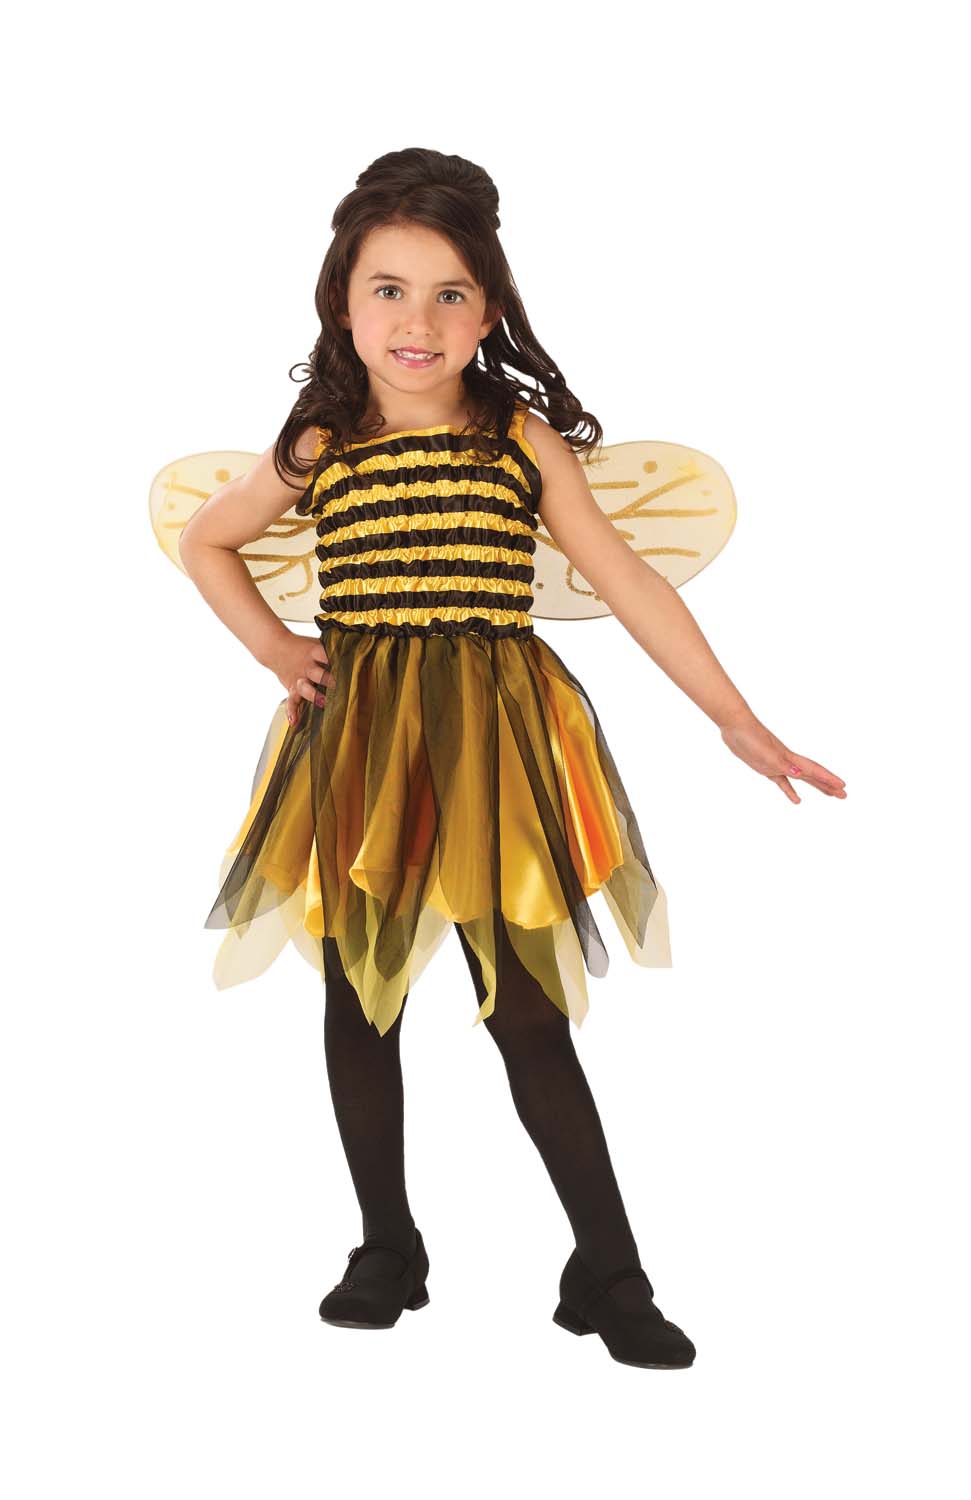 Bumble Bee Child Costumes | Bumble Bee Child Costume | Costume One